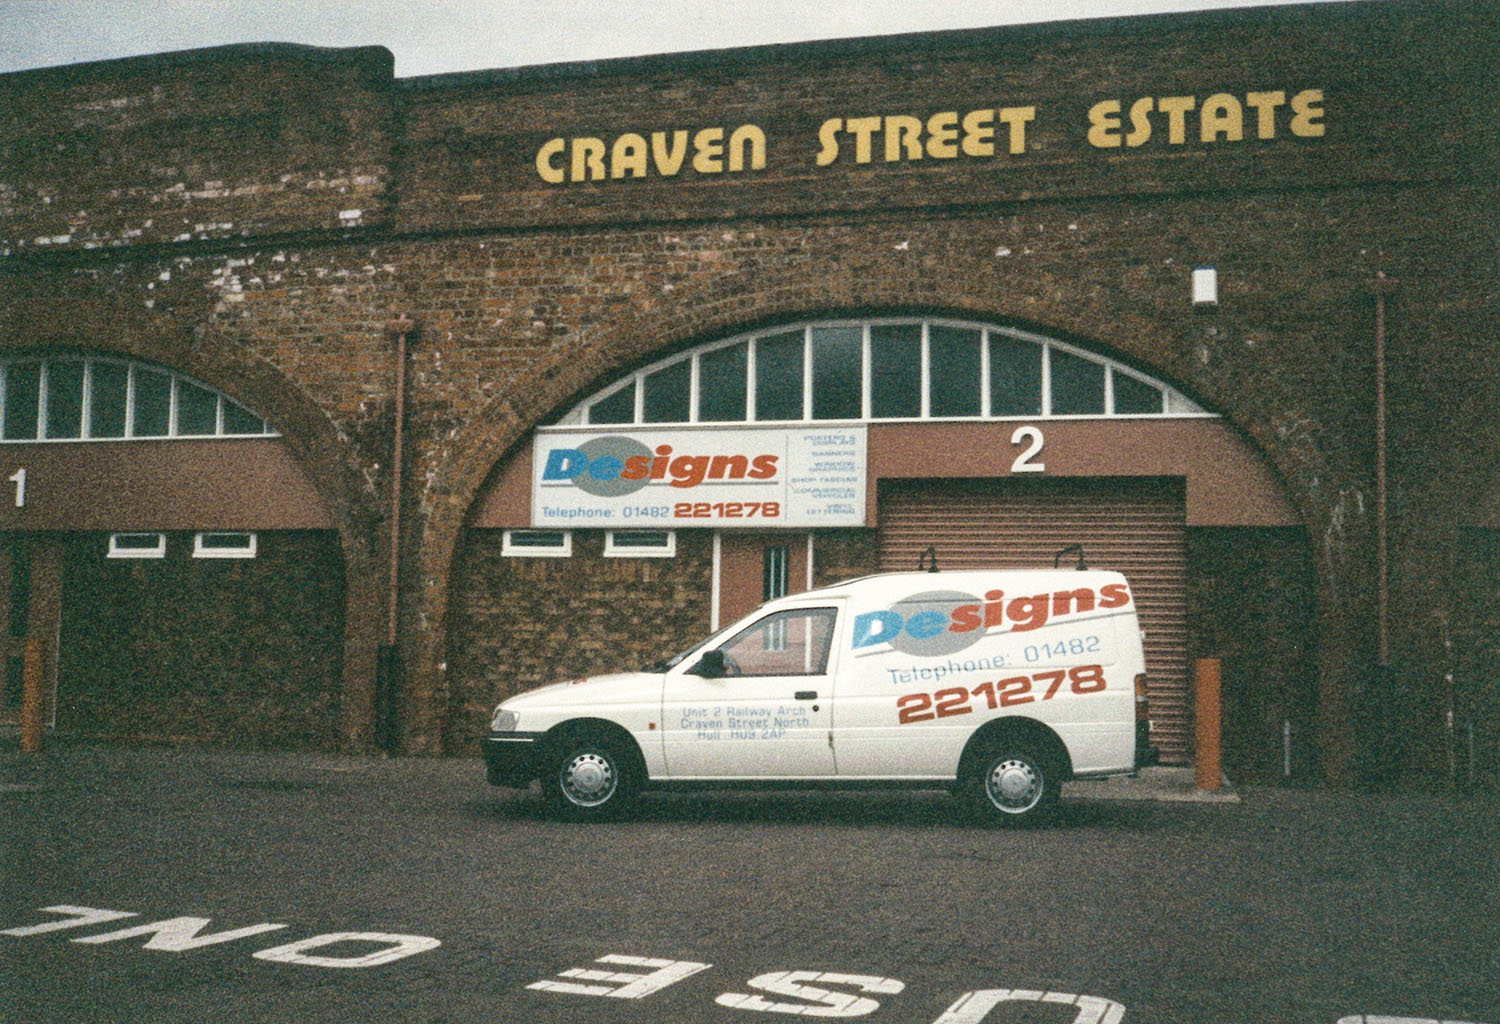 Photo of Designs office with a company car outside.